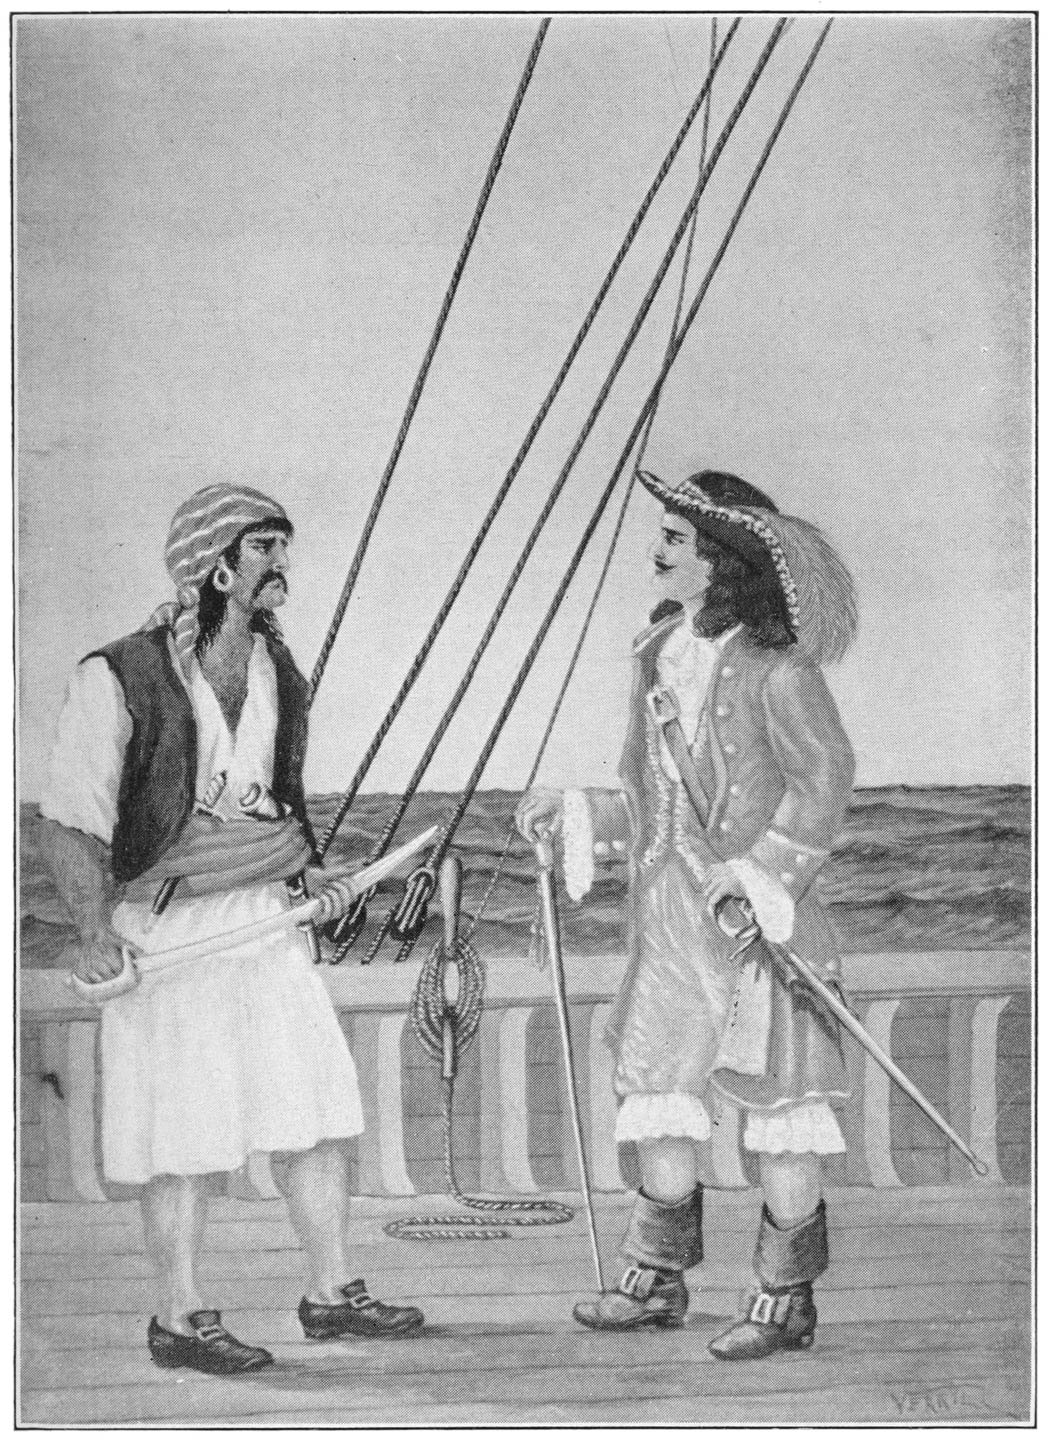 Sir Henry Morgan, the most famous of the buccaneers, with one of his crew